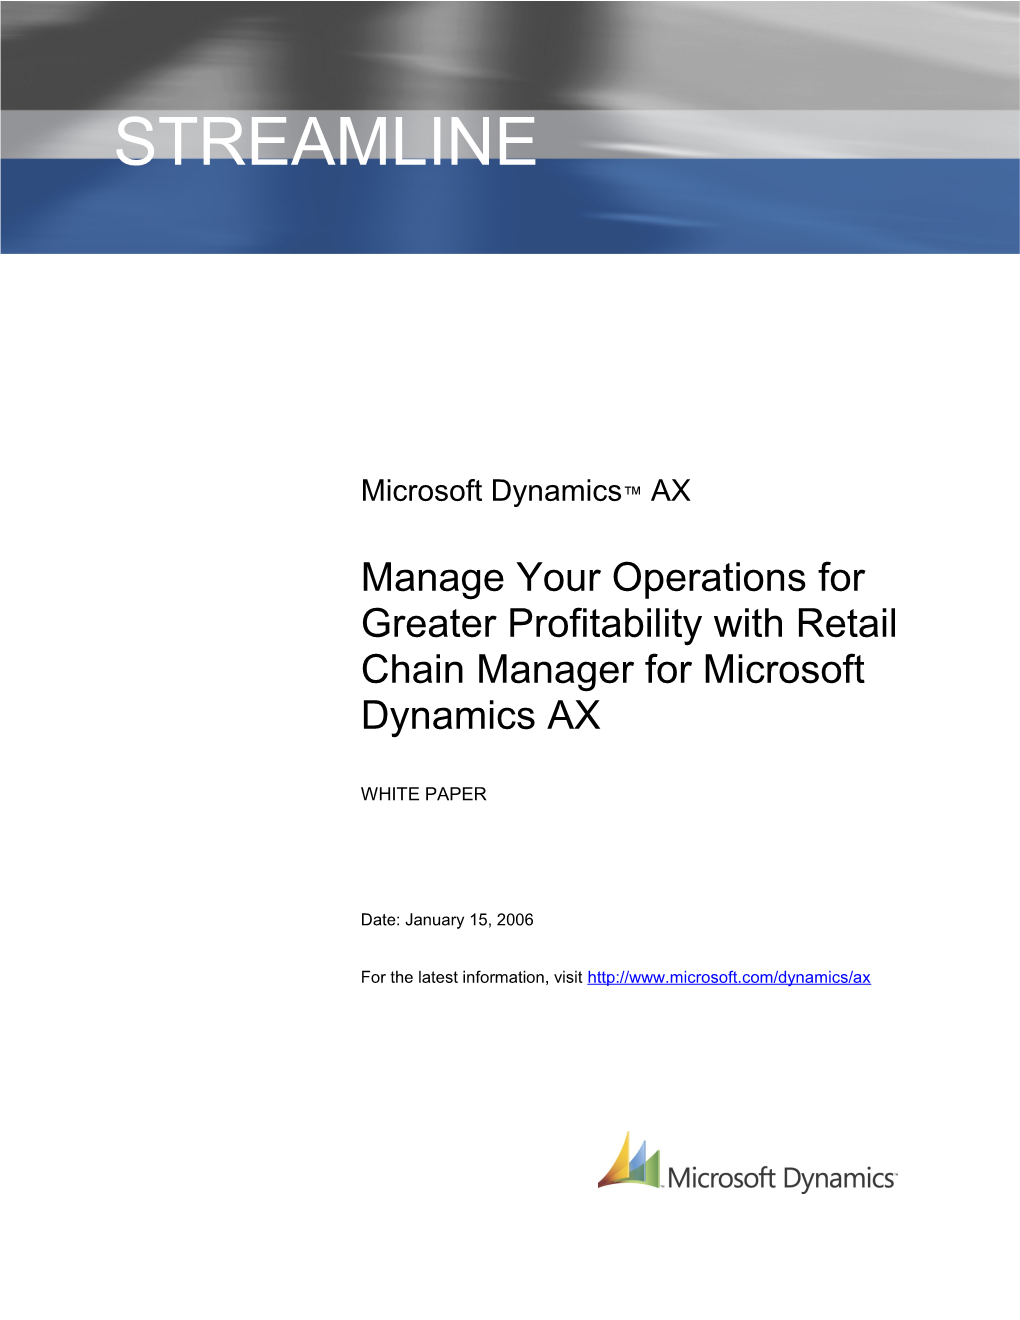 Manage Your Operations for Greater Profitability with Retail Chain Manager for Microsoft